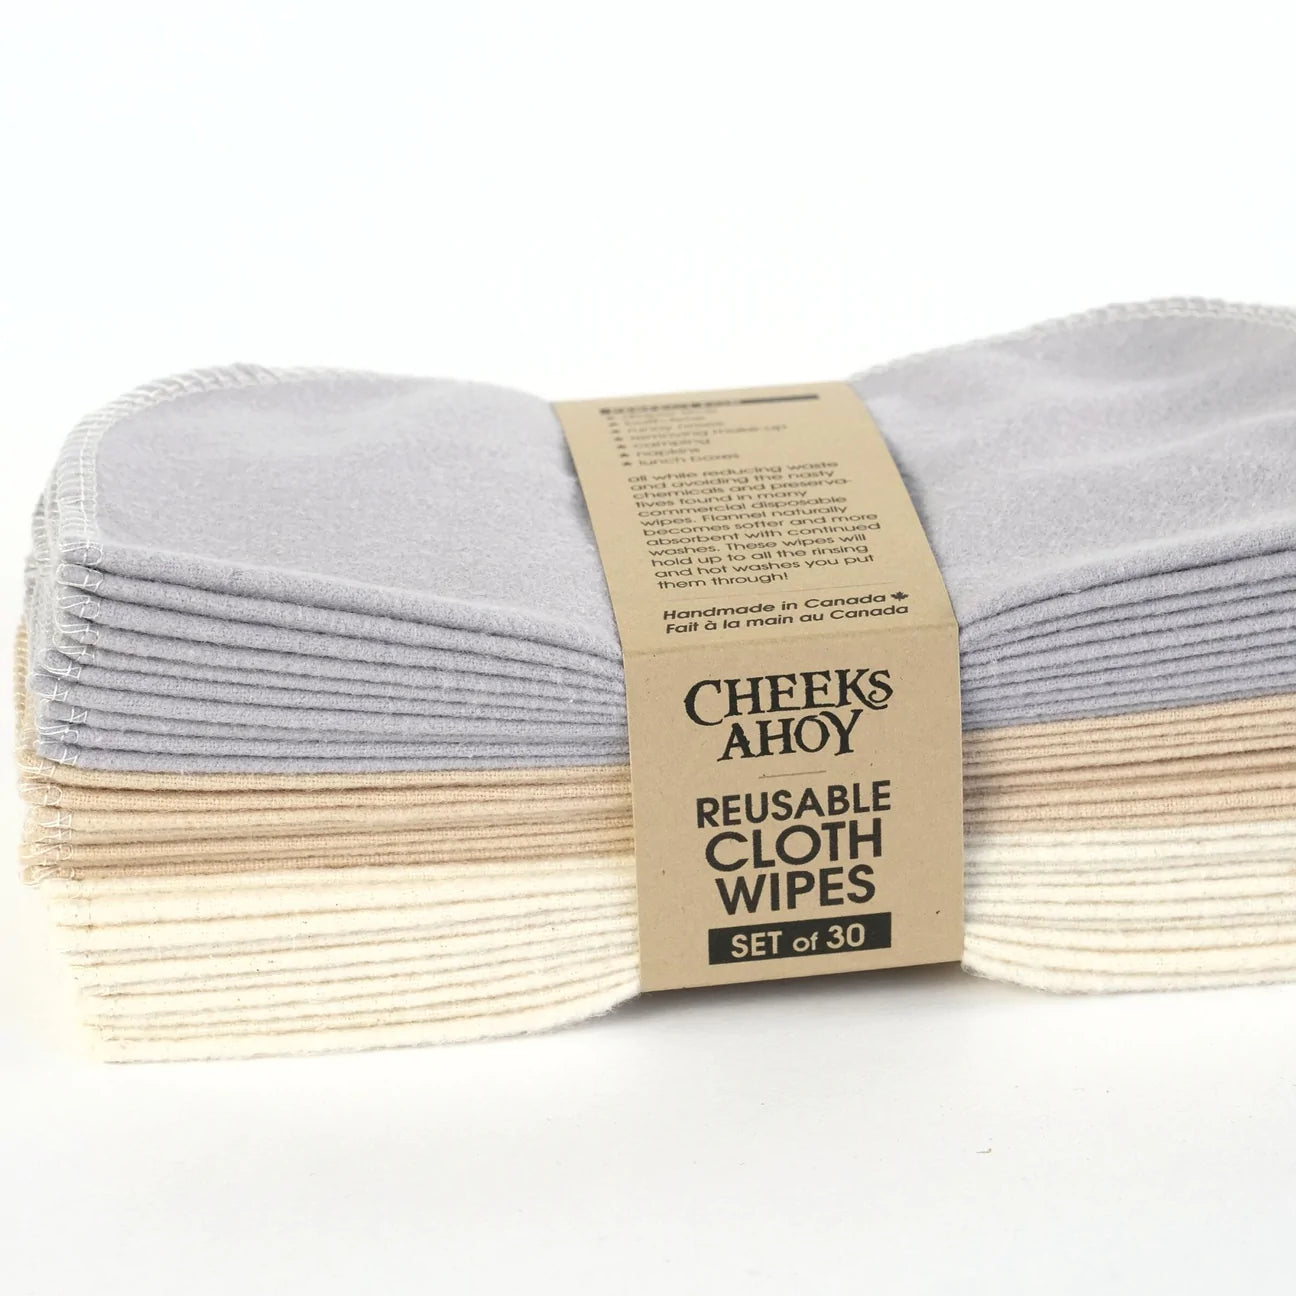 Cloth Wipes - Cotton Flannel Baby and Kids Cheeks Ahoy 30 pack - Suave Prettycleanshop